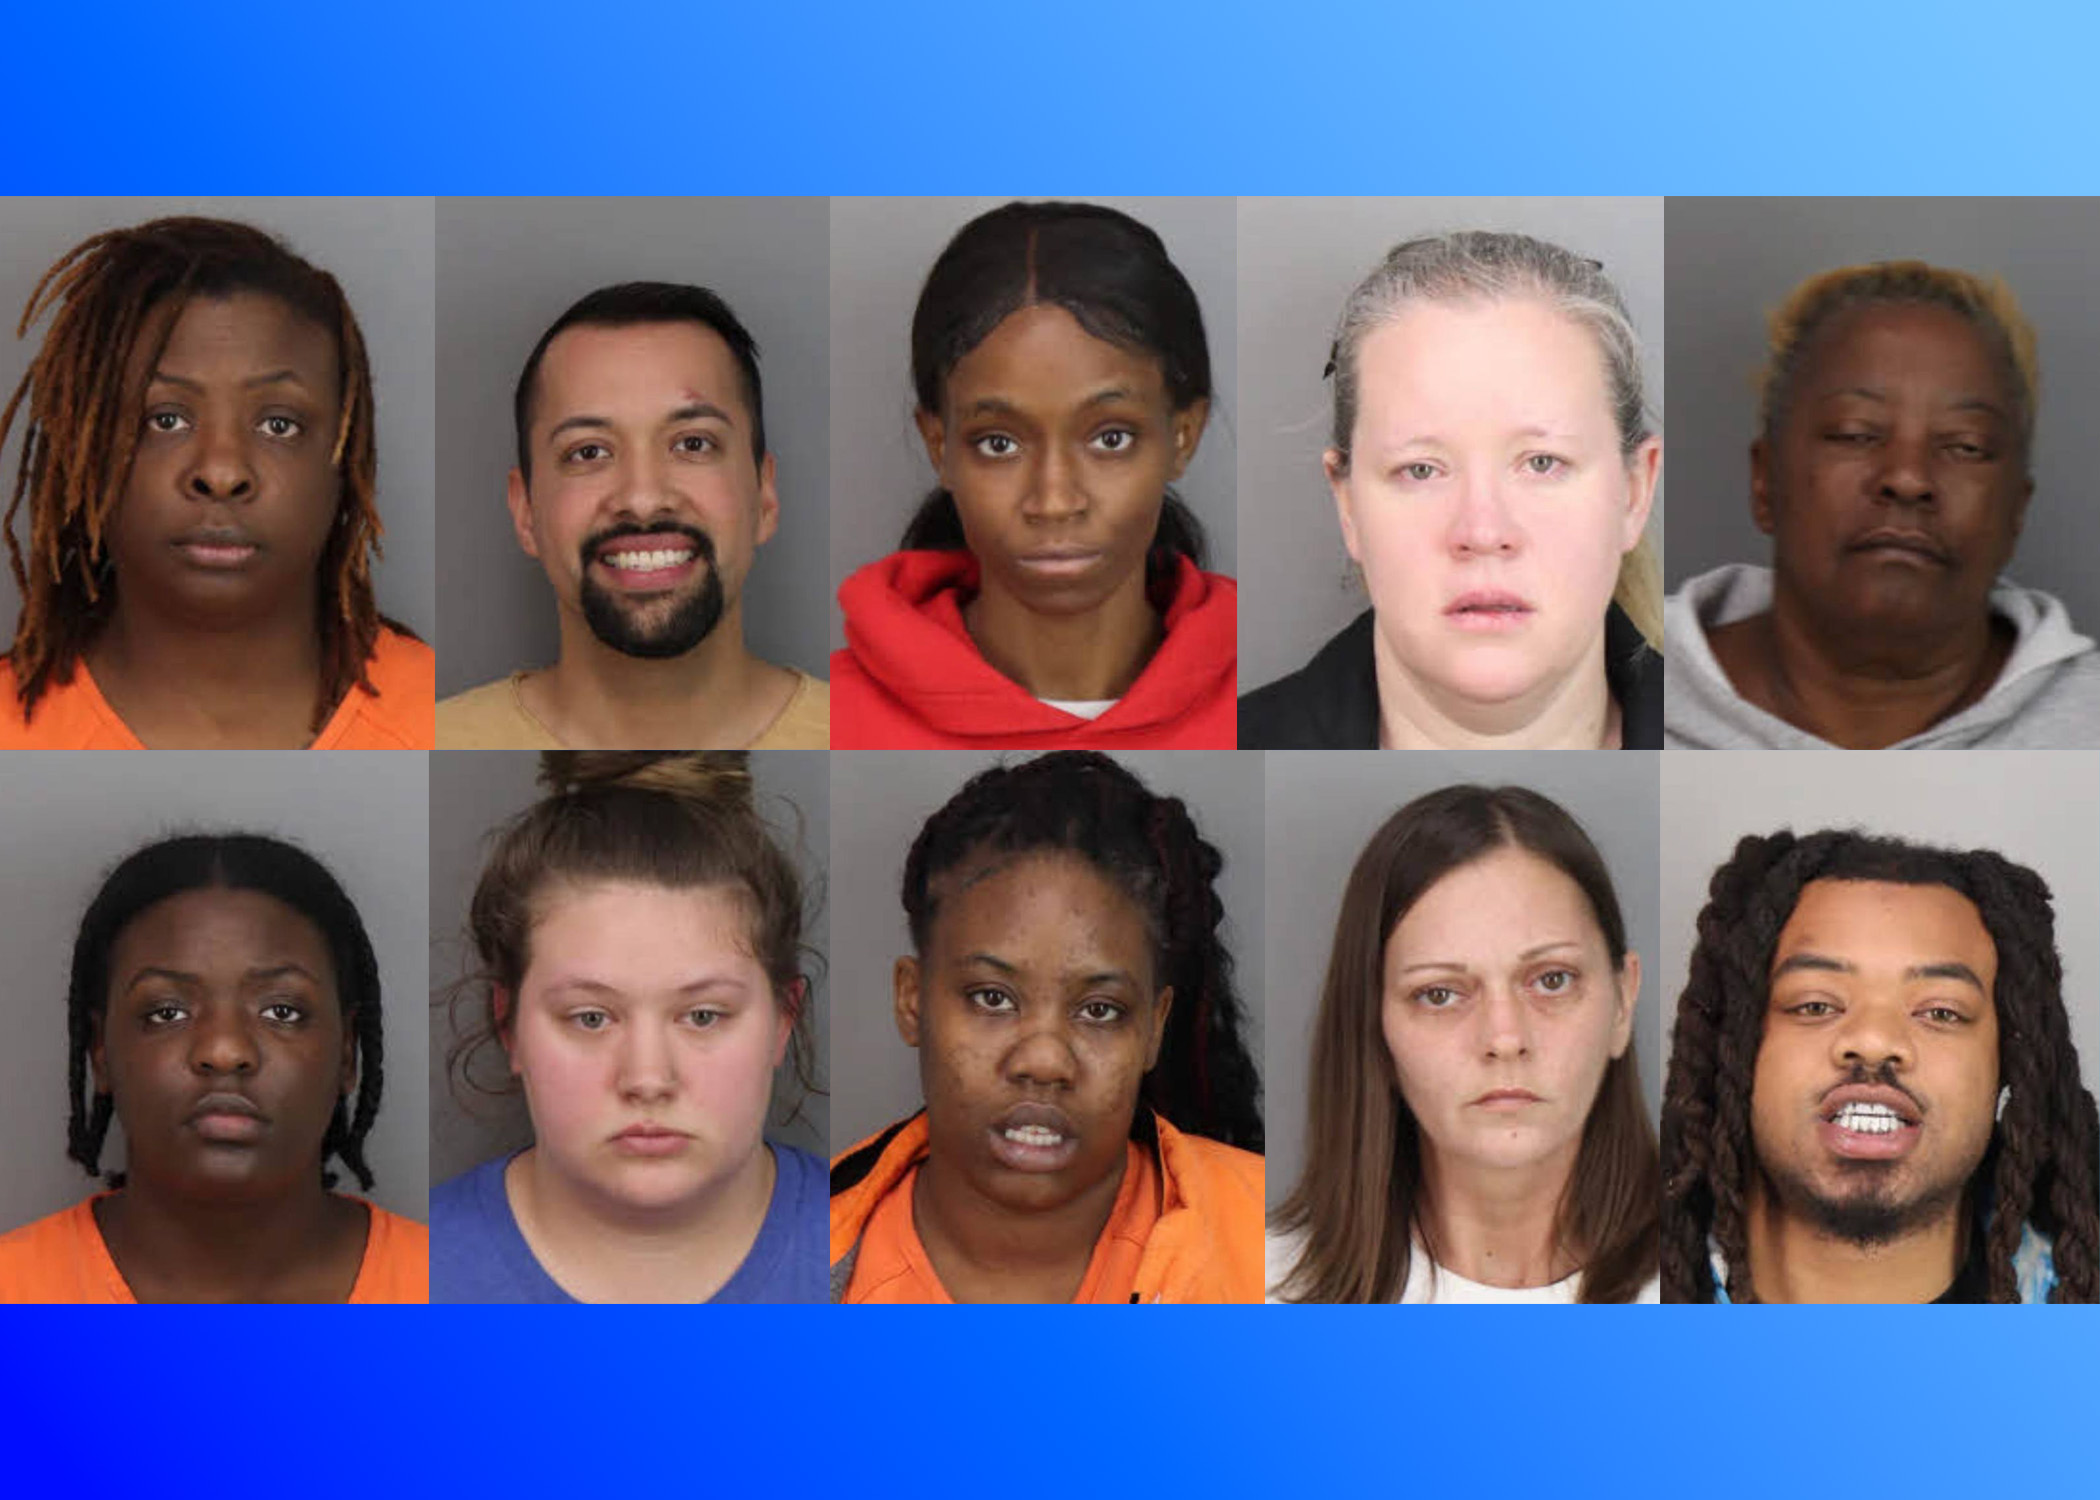 10 arrested for shoplifting in Trussville